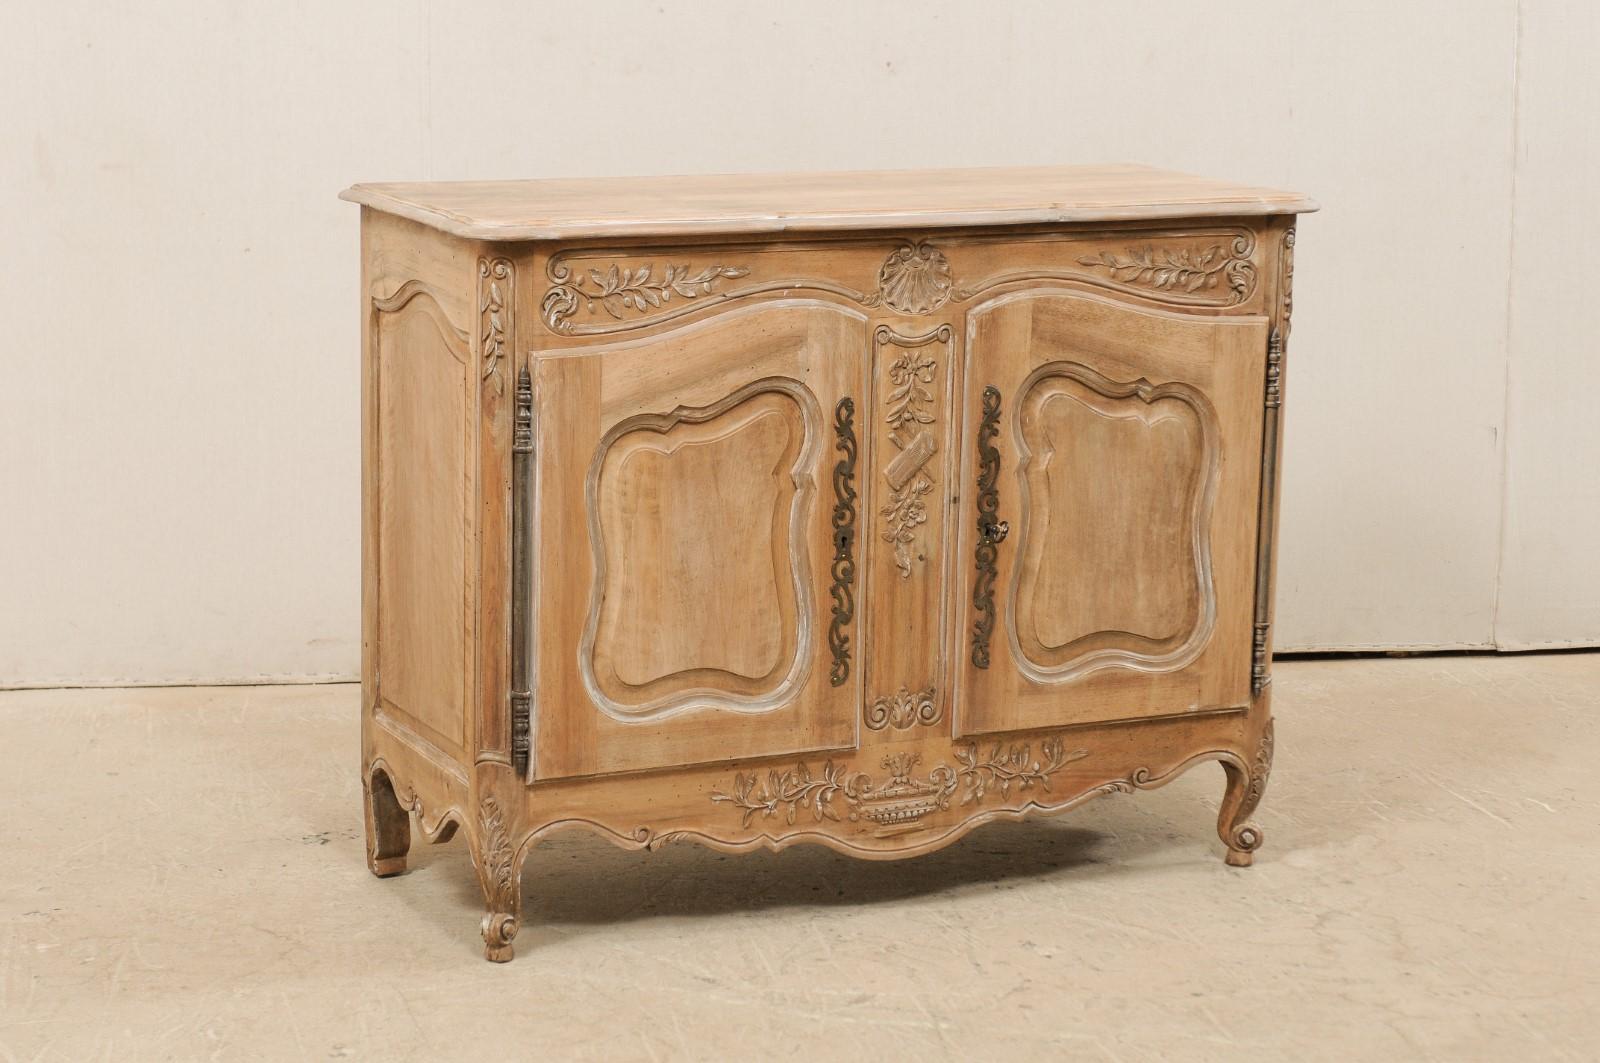 A French two-door bleached wood buffet cabinet from the mid-20th century. This vintage cabinet from France features a subtly scalloped edge top, which rests above a case which houses a pair of arched paneled doors, surrounded within abundantly